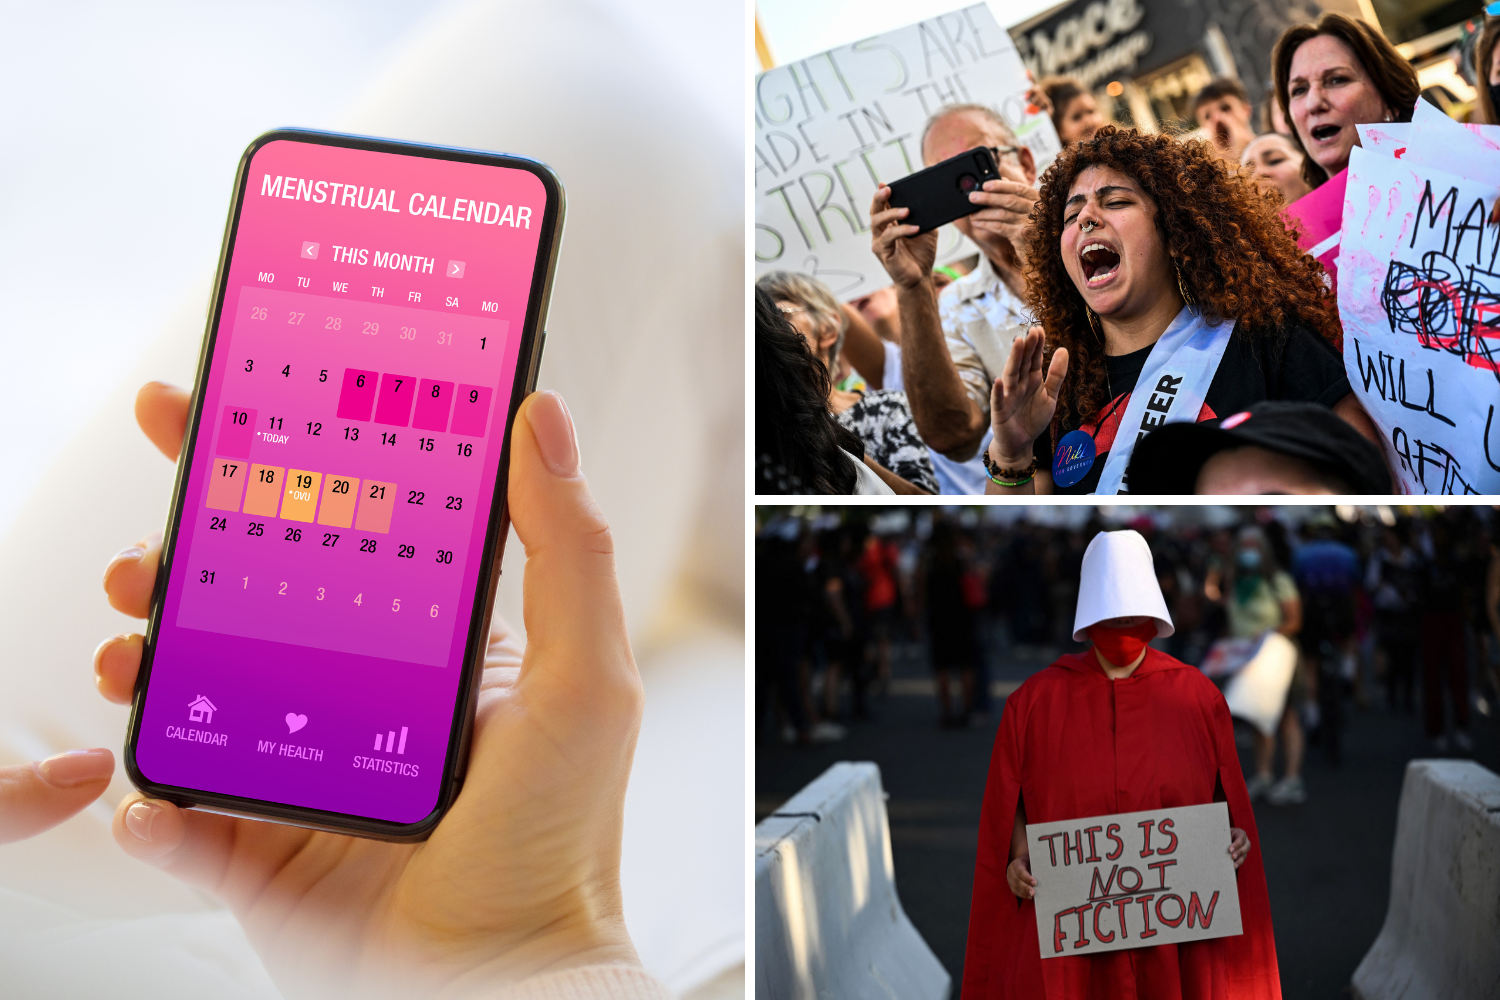 Why Delete Period Tracking App Roe V Wade Ruling Sparks Panic Over Data